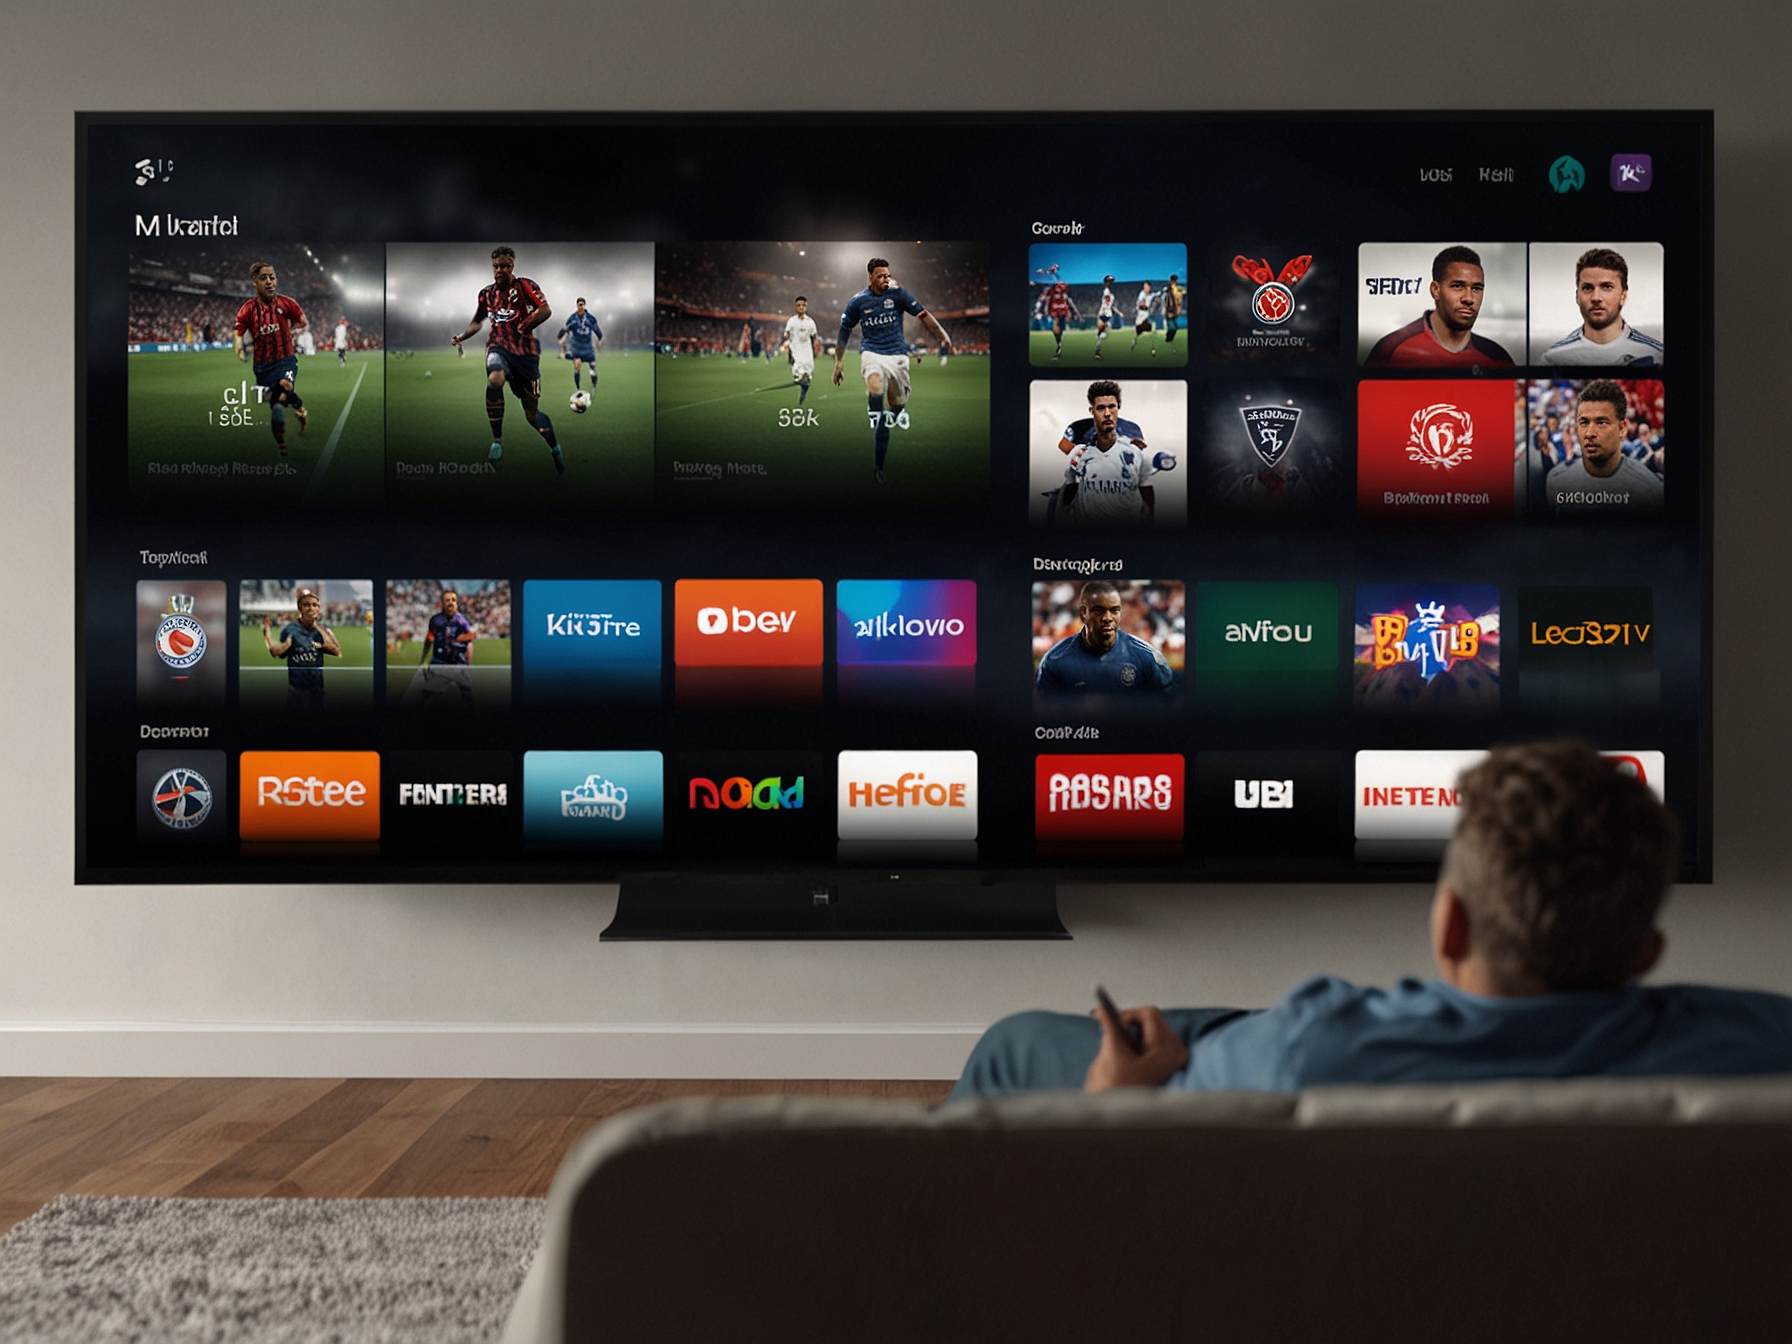 Illustration showing Apple TV’s interface highlighting the Catch Up option, compiling and displaying major plays of an MLS match in an easily digestible format for viewers.